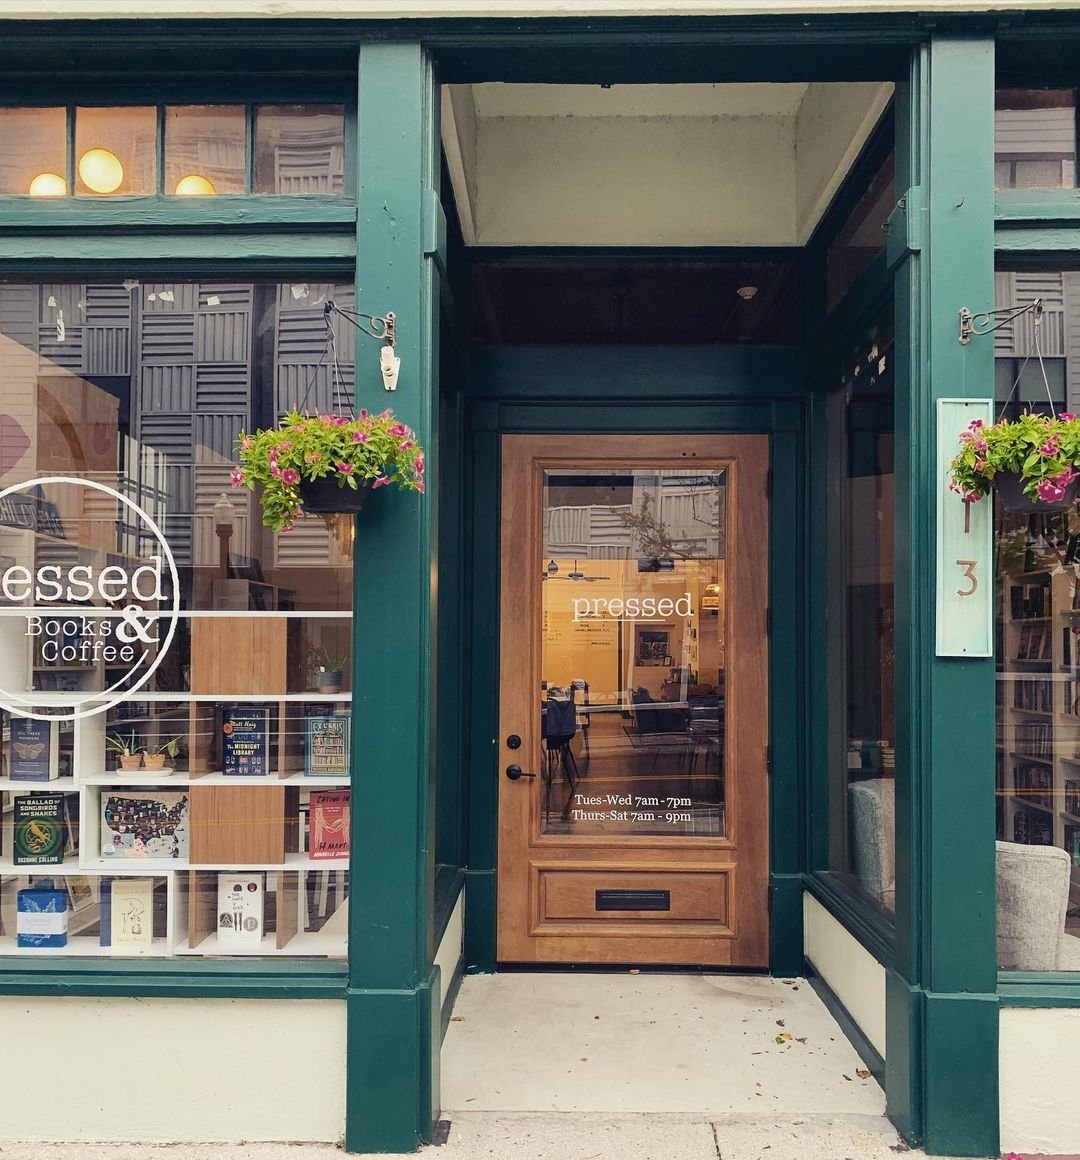 Shopfront to Pressed Books and Coffee